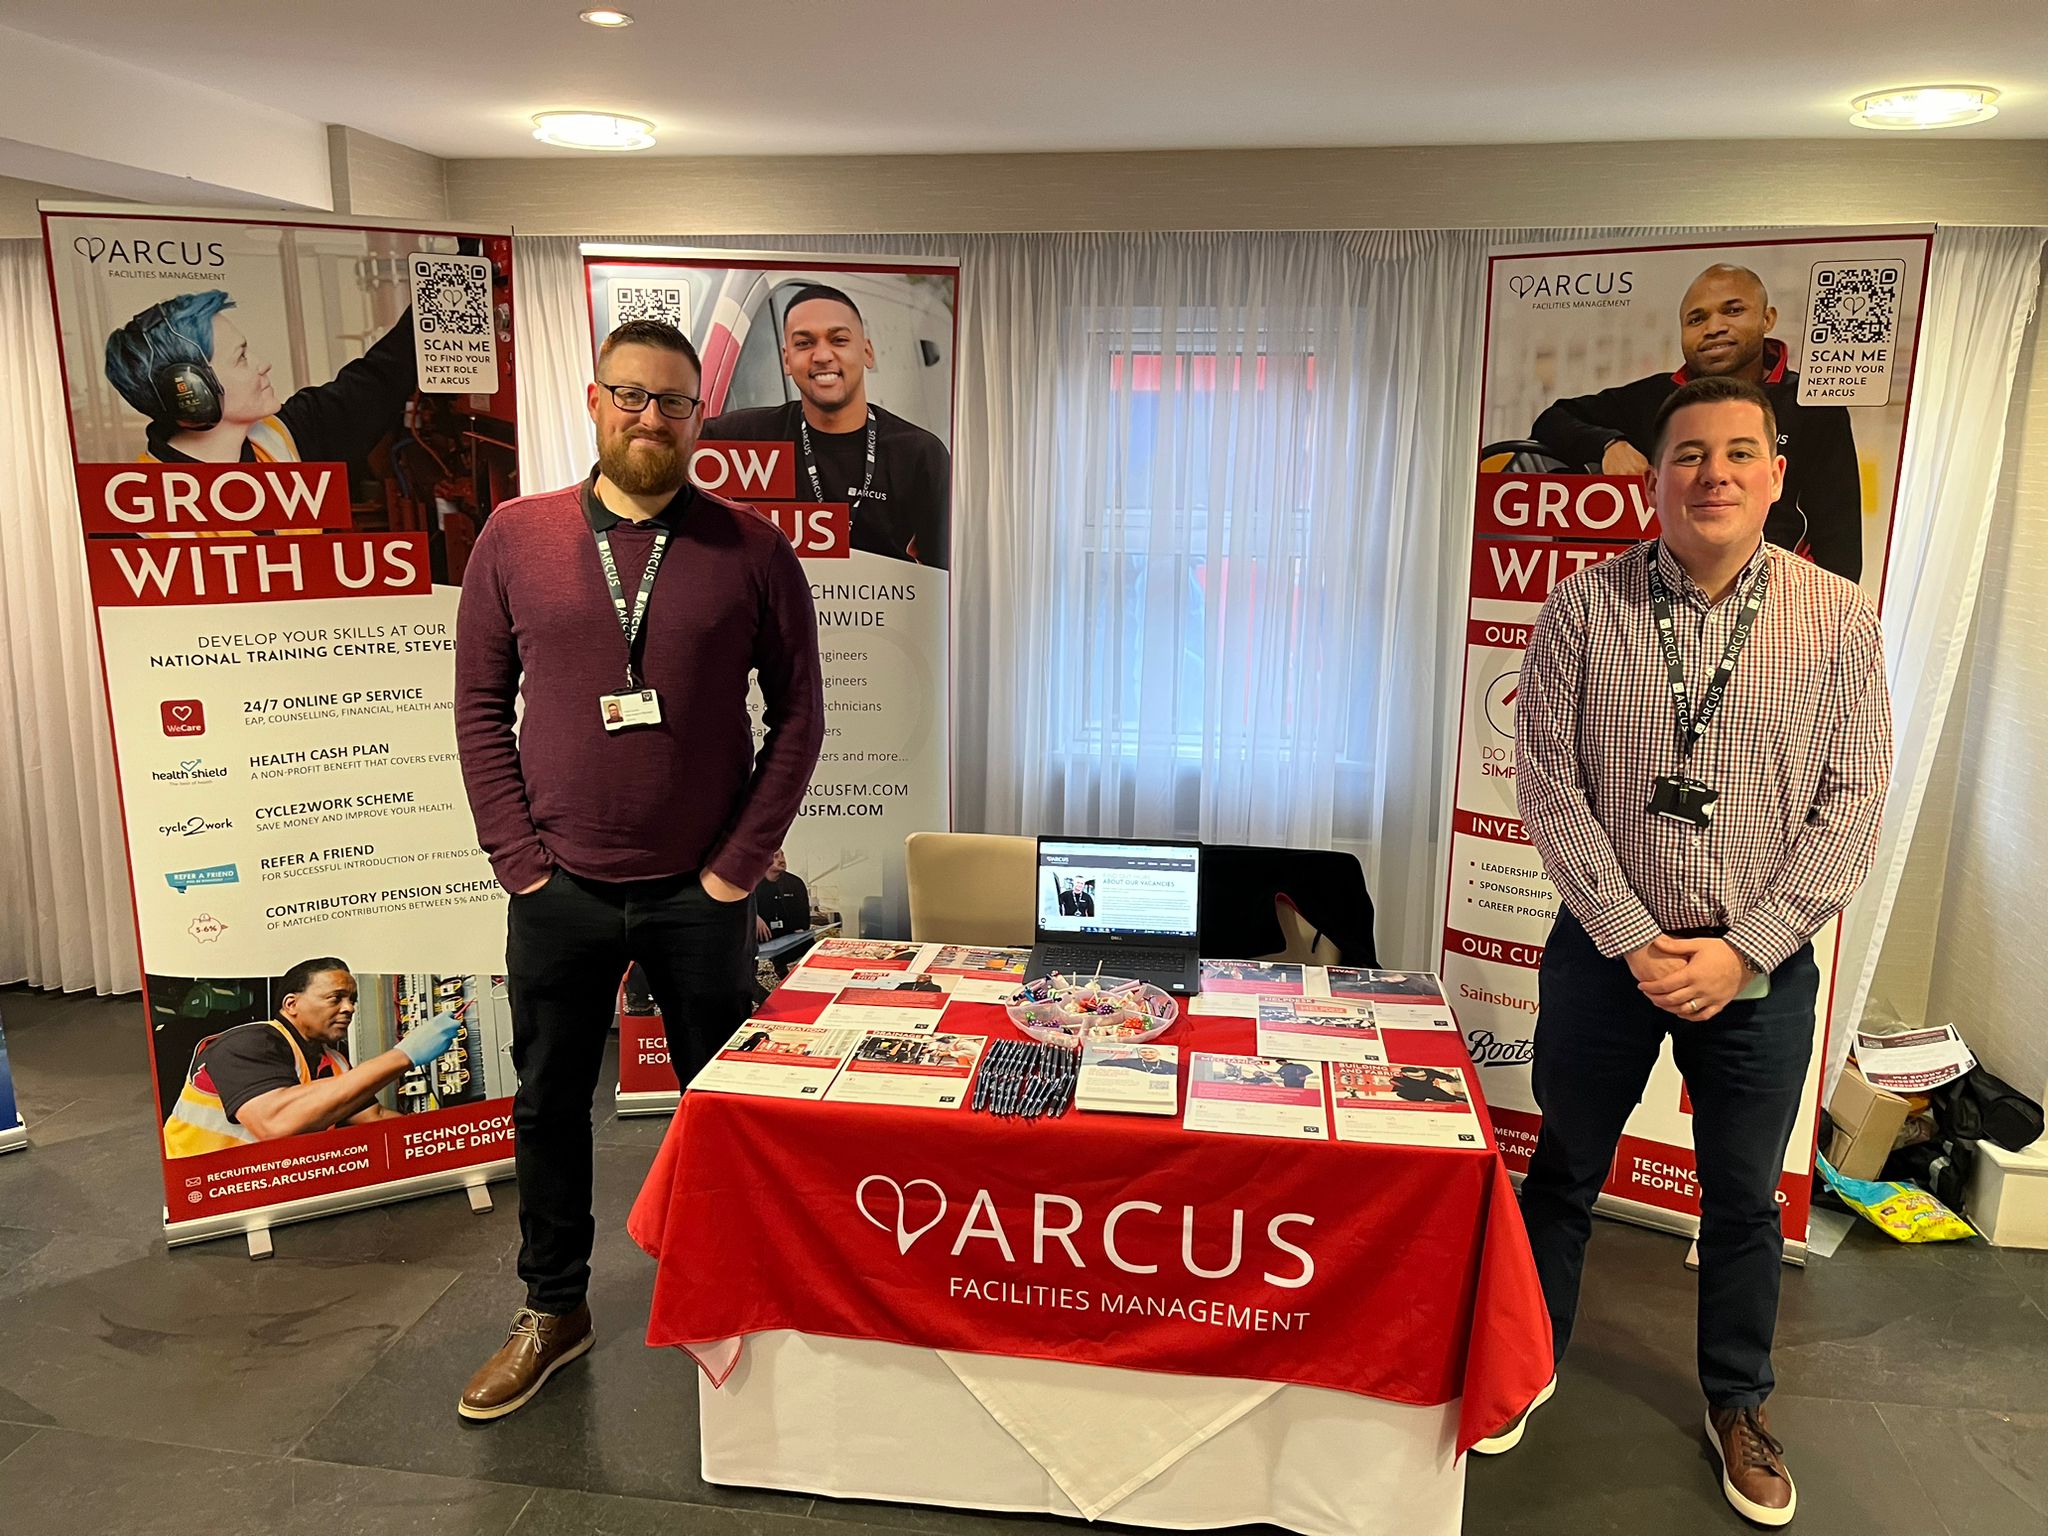 Arcus FM at our event in South London